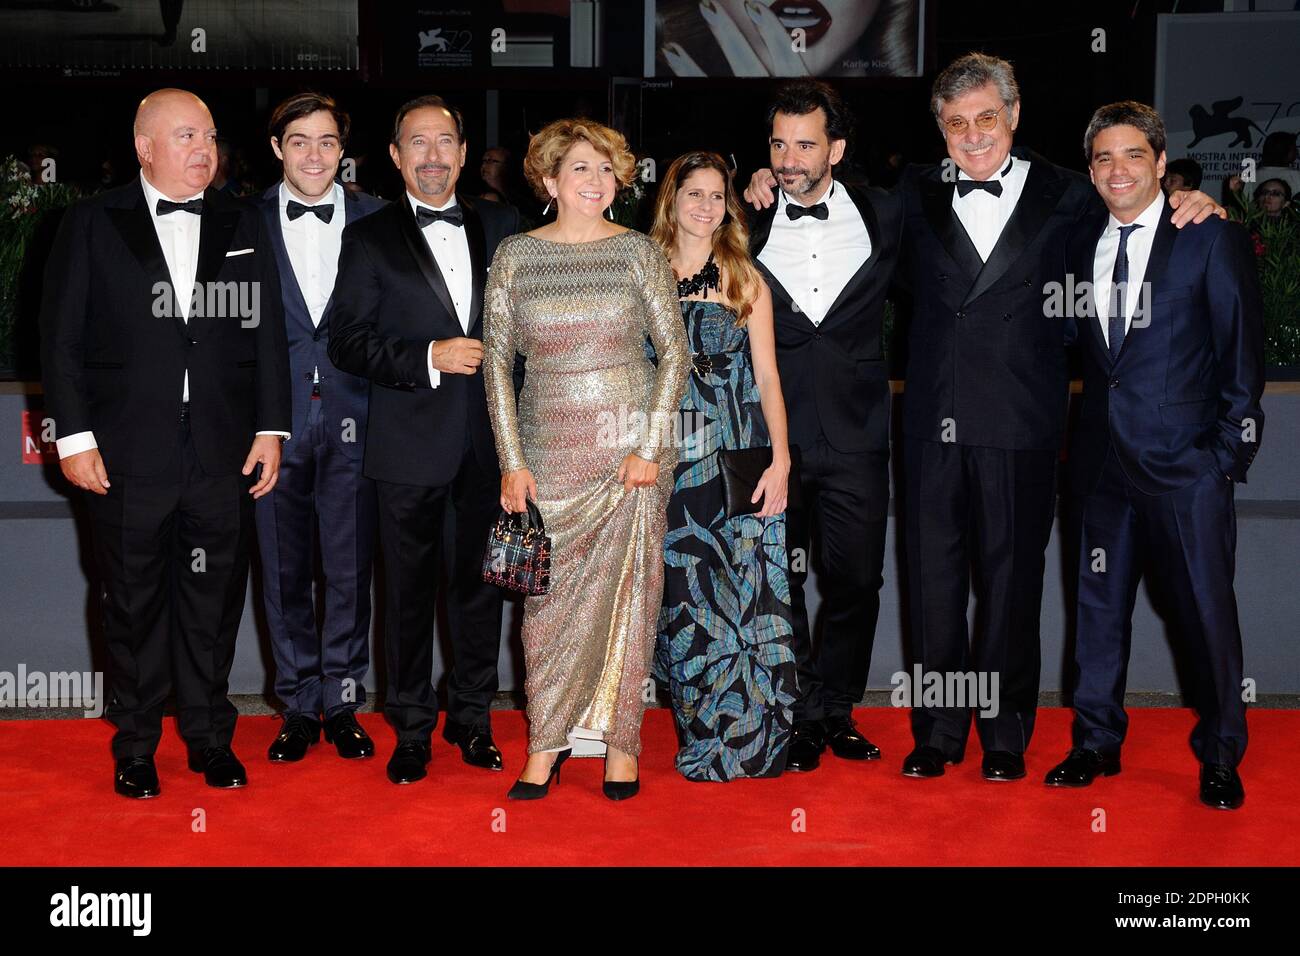 Peter Lanzani, Pablo Trapero, Guillermo Francella and cast attending the premiere for the film El Clan as part of the 72nd Venice International Film Festival (Mostra) in Venice, Italy, on September 6, 2015. Photo by Aurore Marechal/ABACAPRESS.COM Stock Photo